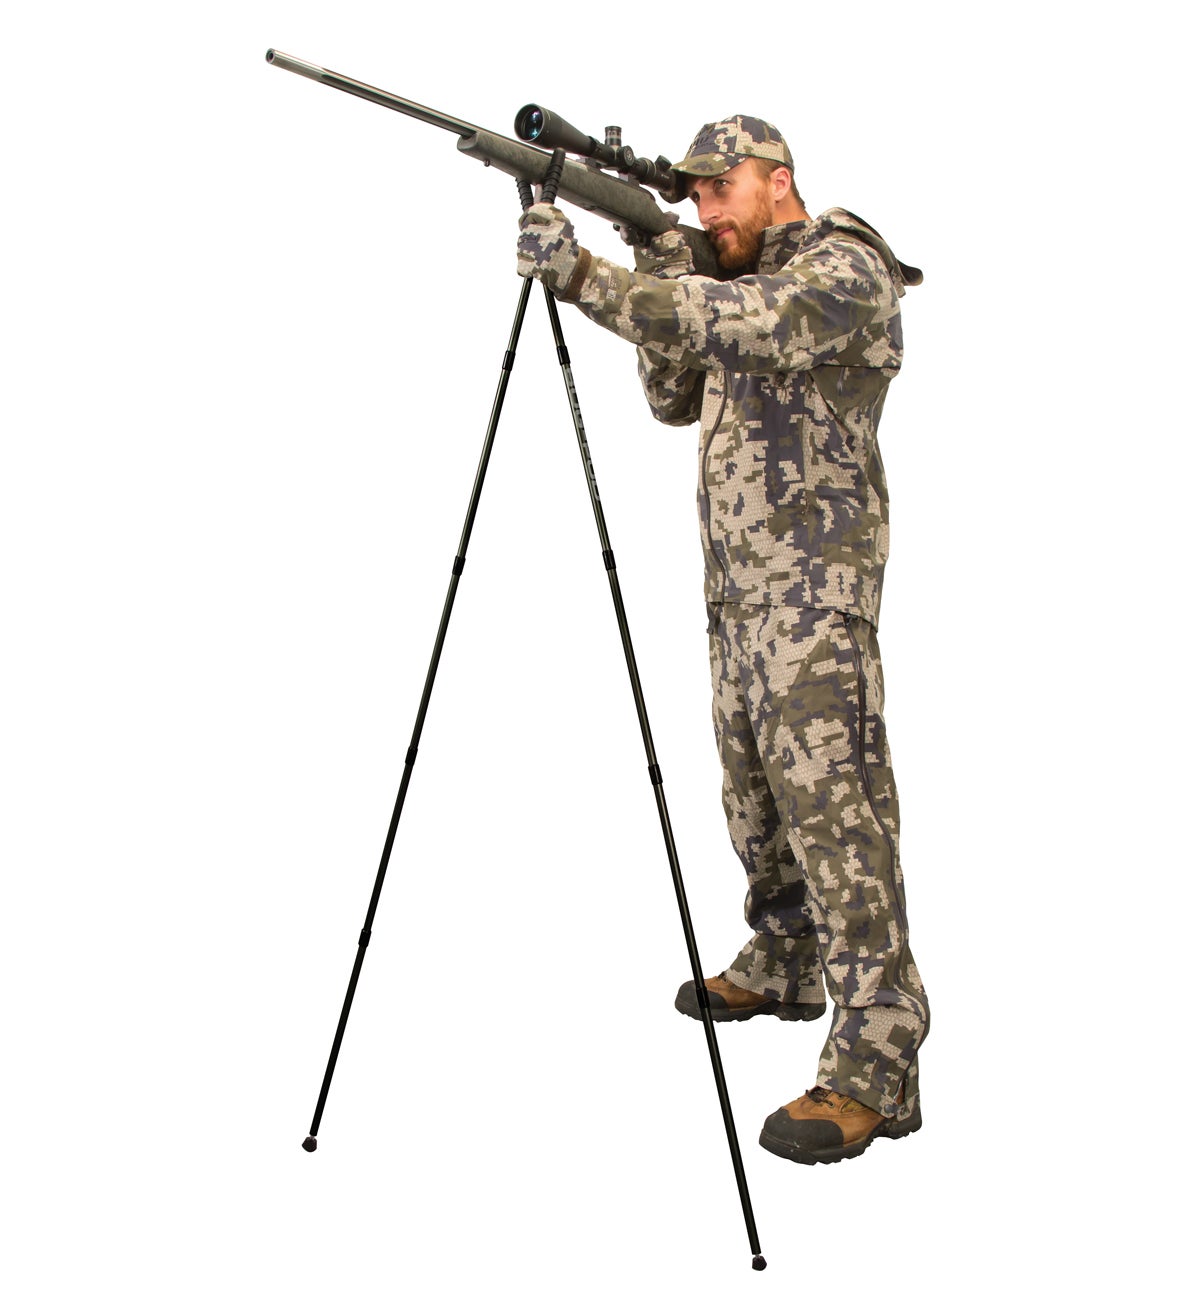 AllOutdoor’s 12 Days of Christmas Day 10: Shooting Sticks and Tripods